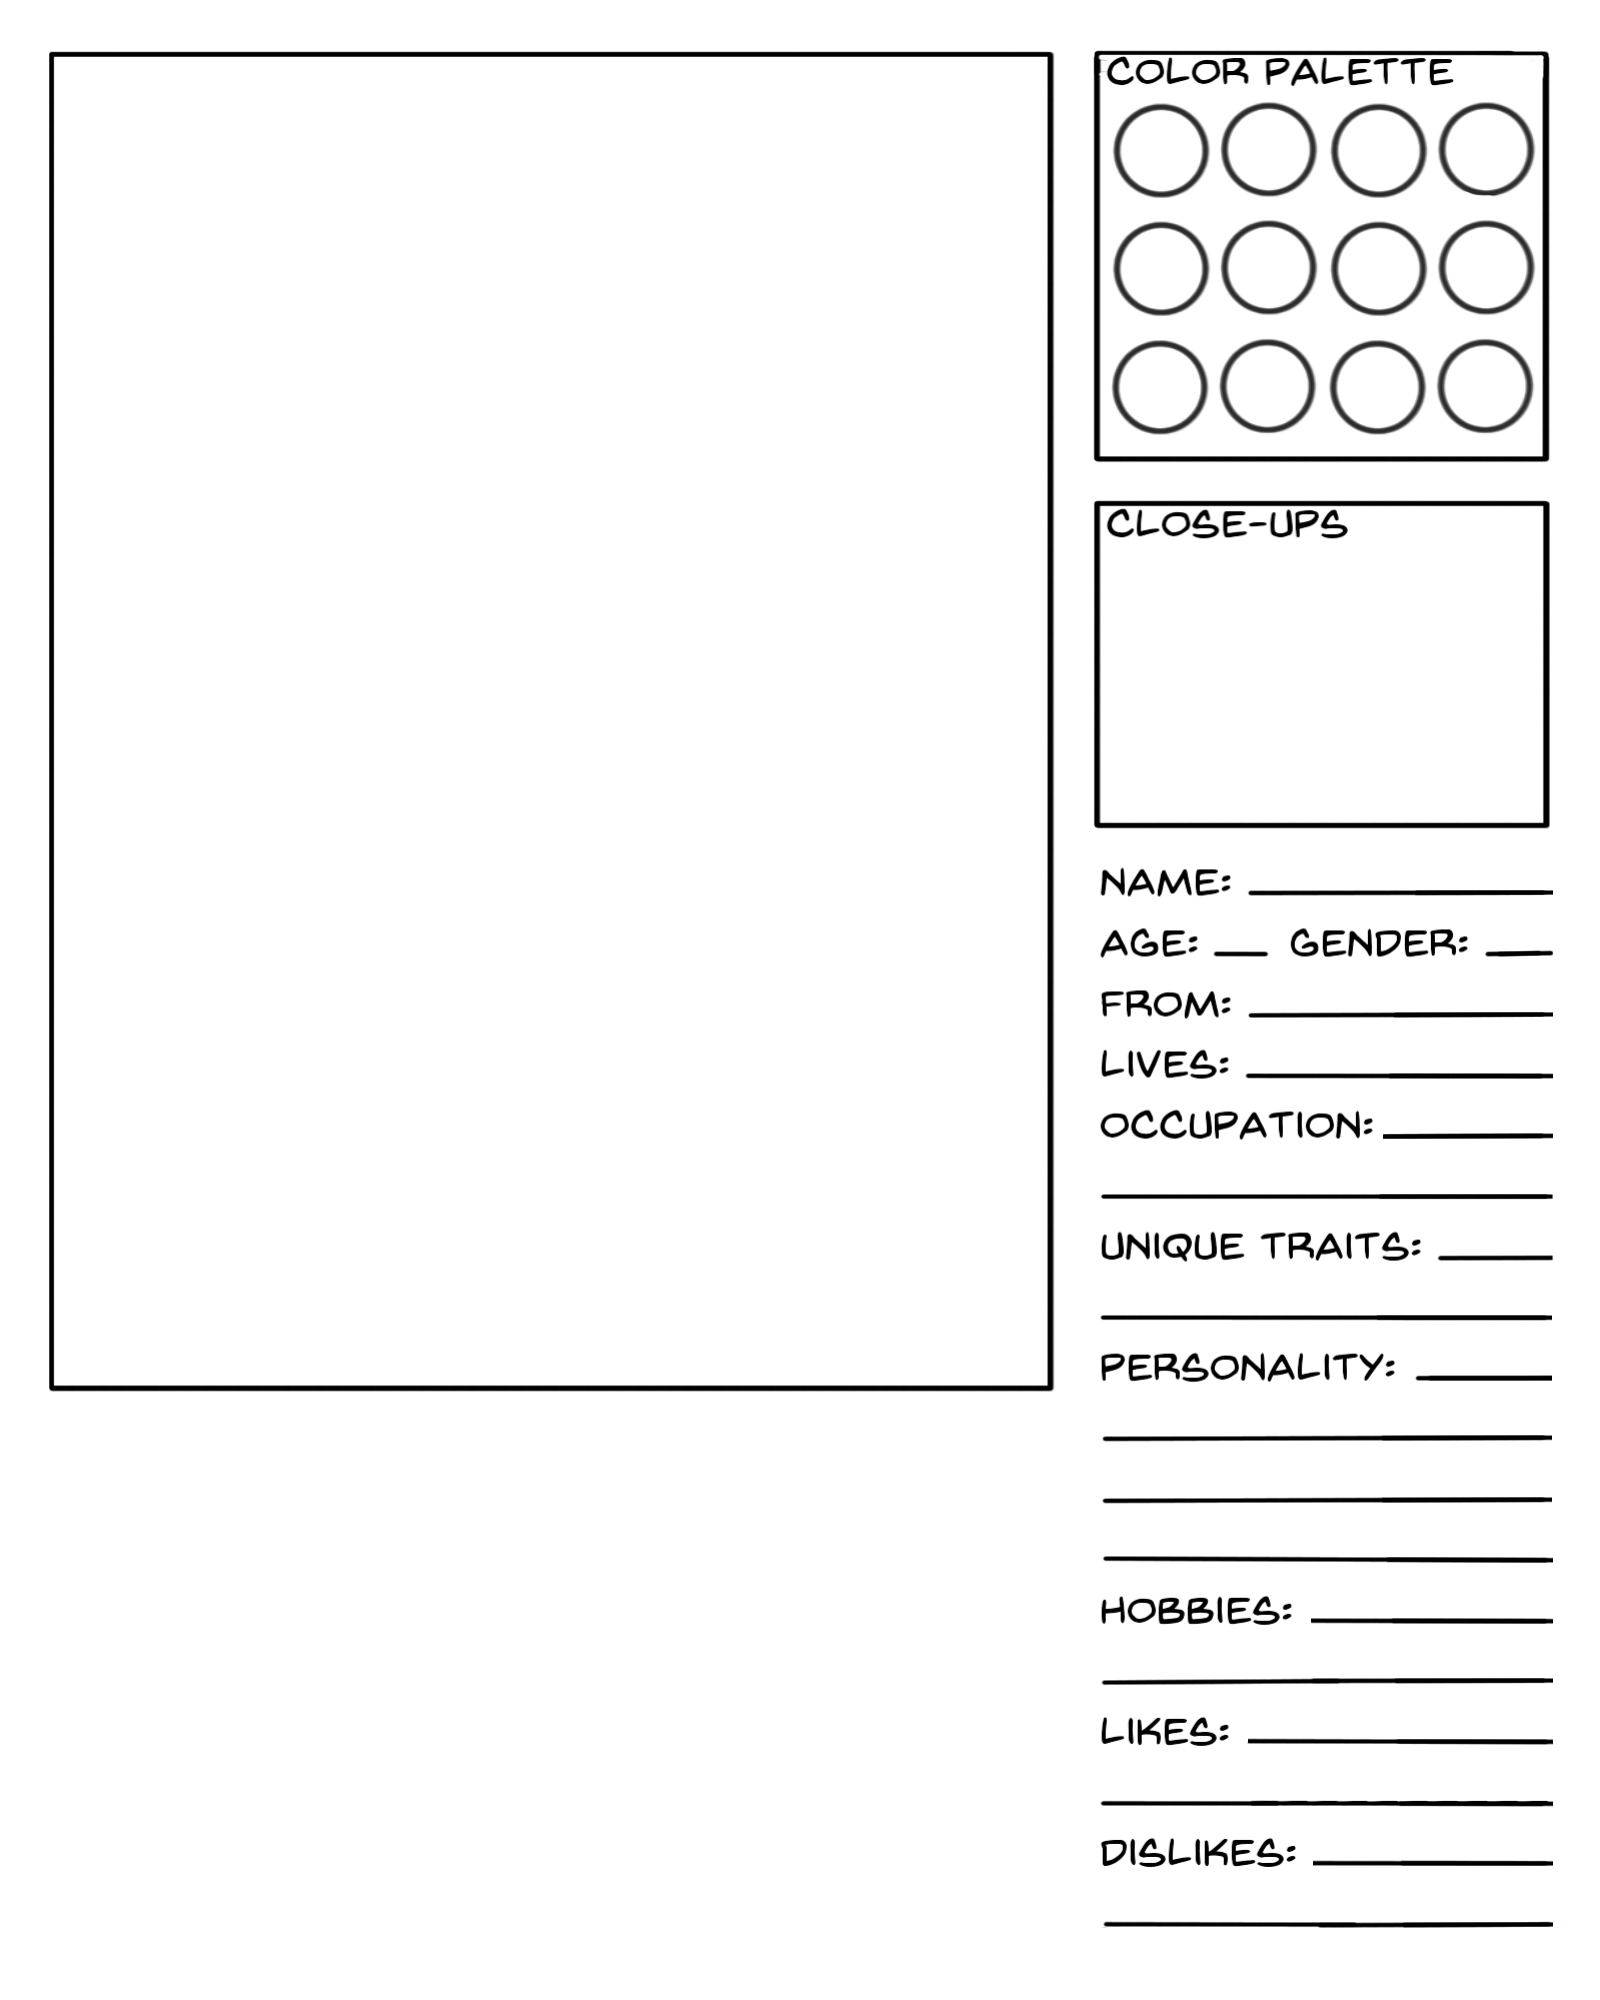 Character Data Sheet Template Ordinary Character By Carenrose On Deviantart